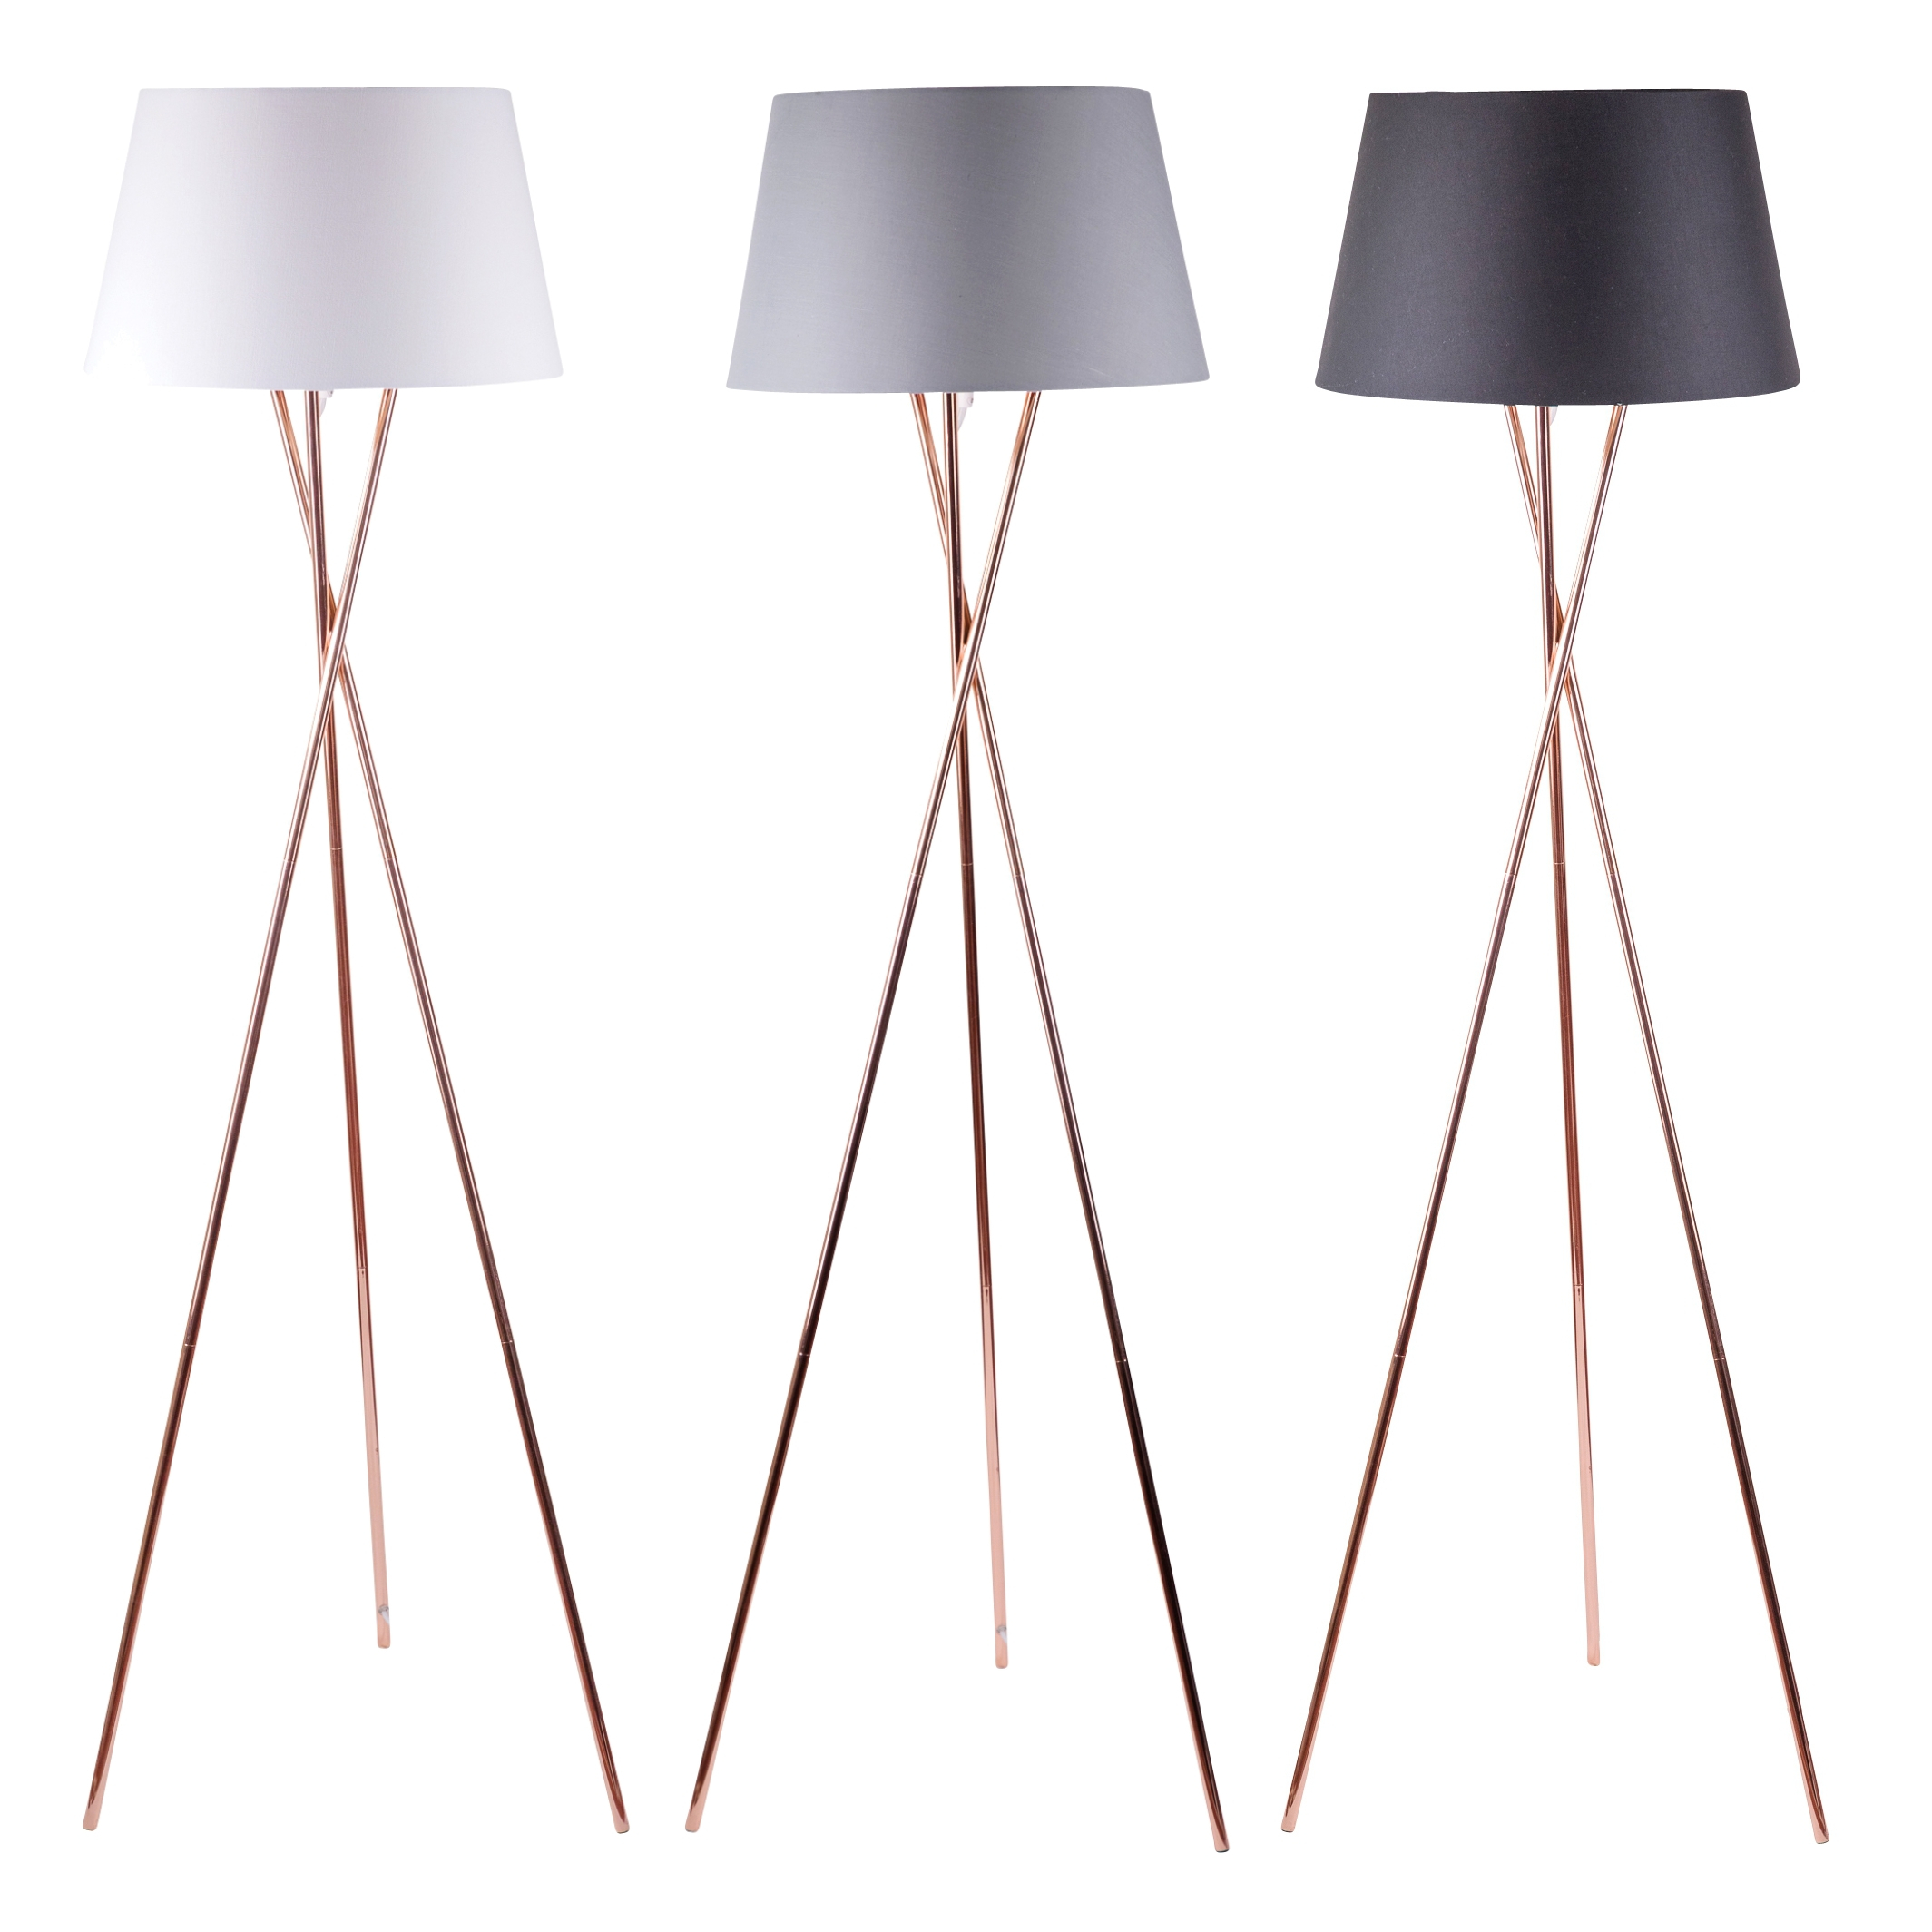 Details About Modern Copper Tripod Floor Lamp Standard Light With Grey White Or Black Shade with regard to size 2129 X 2129